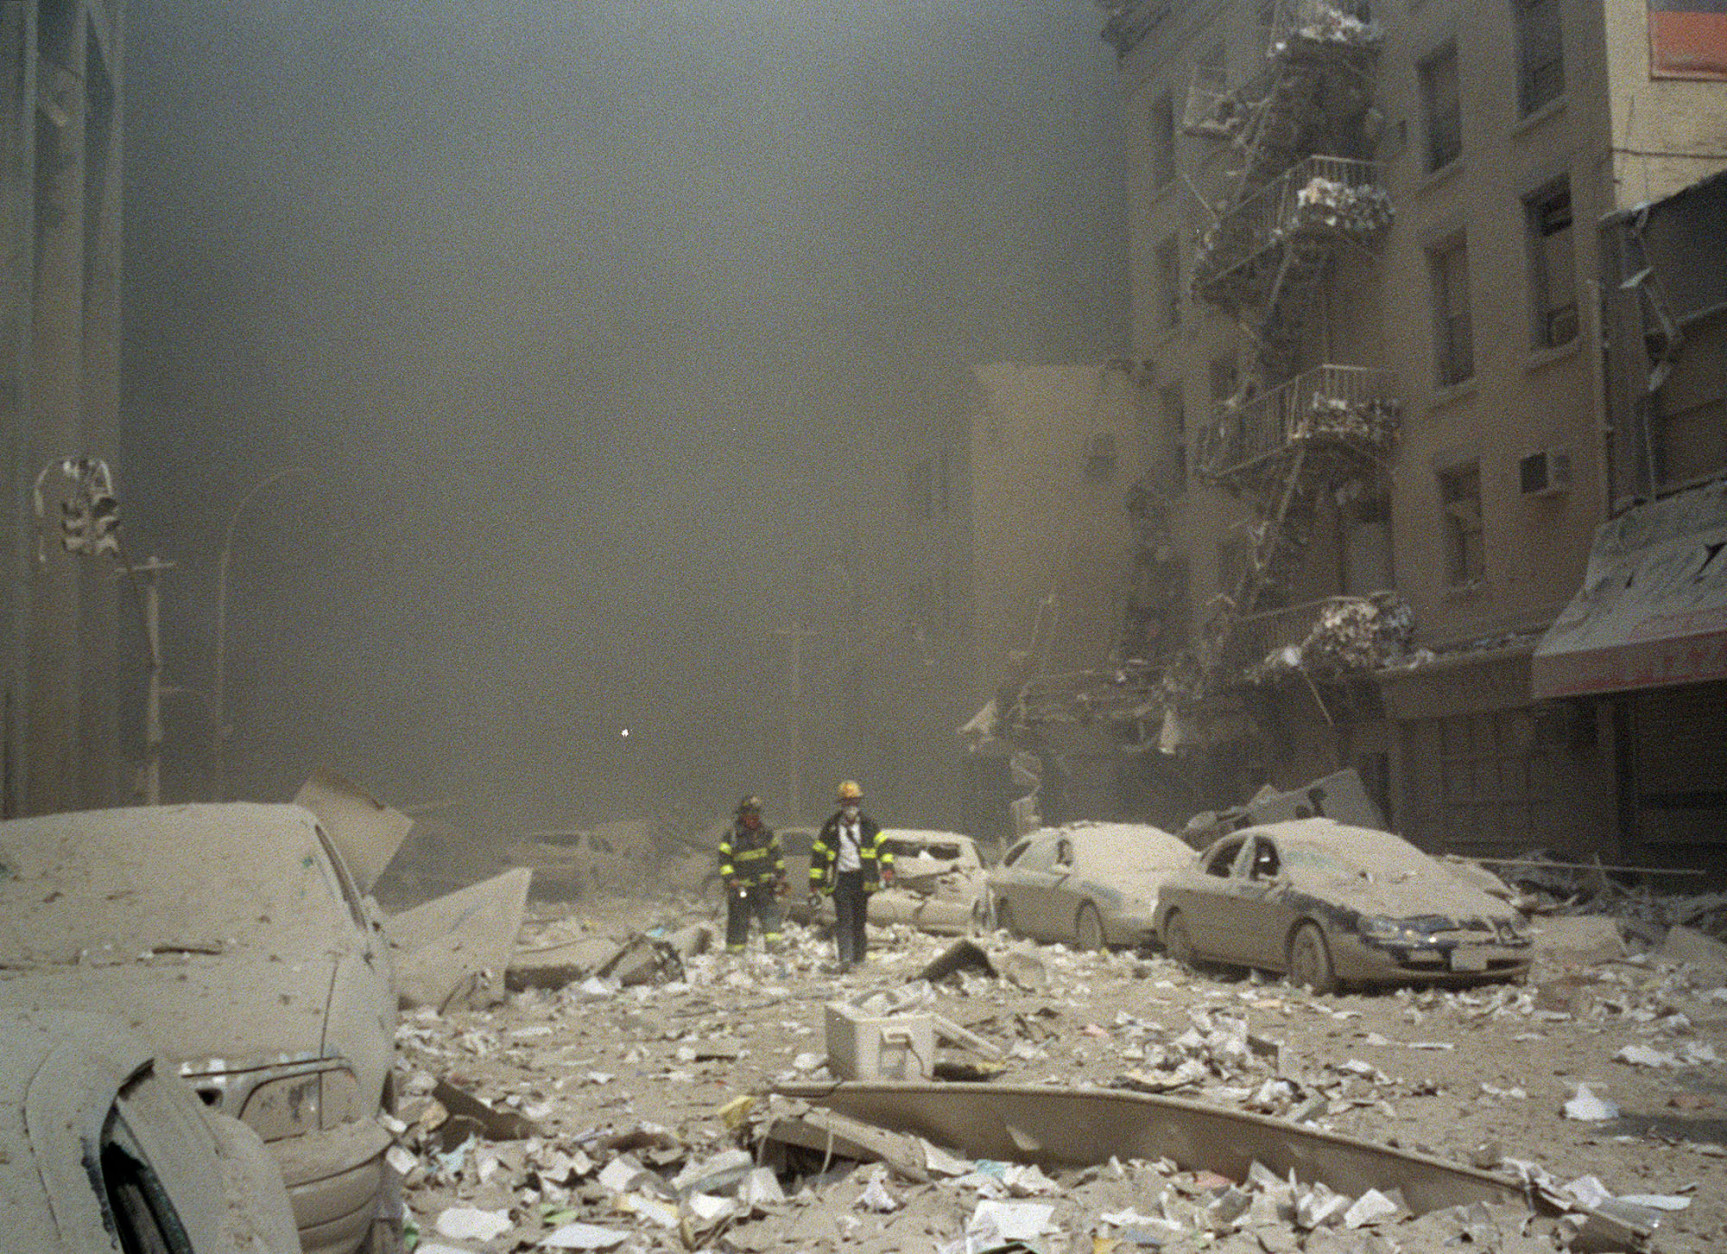 FIremen walk through a dust and debris covered street in lower Manhattan Tuesday, Sept. 11, 2001, after a terrorist attack at the World Trade Center. Two jet planes were crashed into the twin towers, collapsing them and covering the area with the debris.(AP Photo/Richard Cohen)